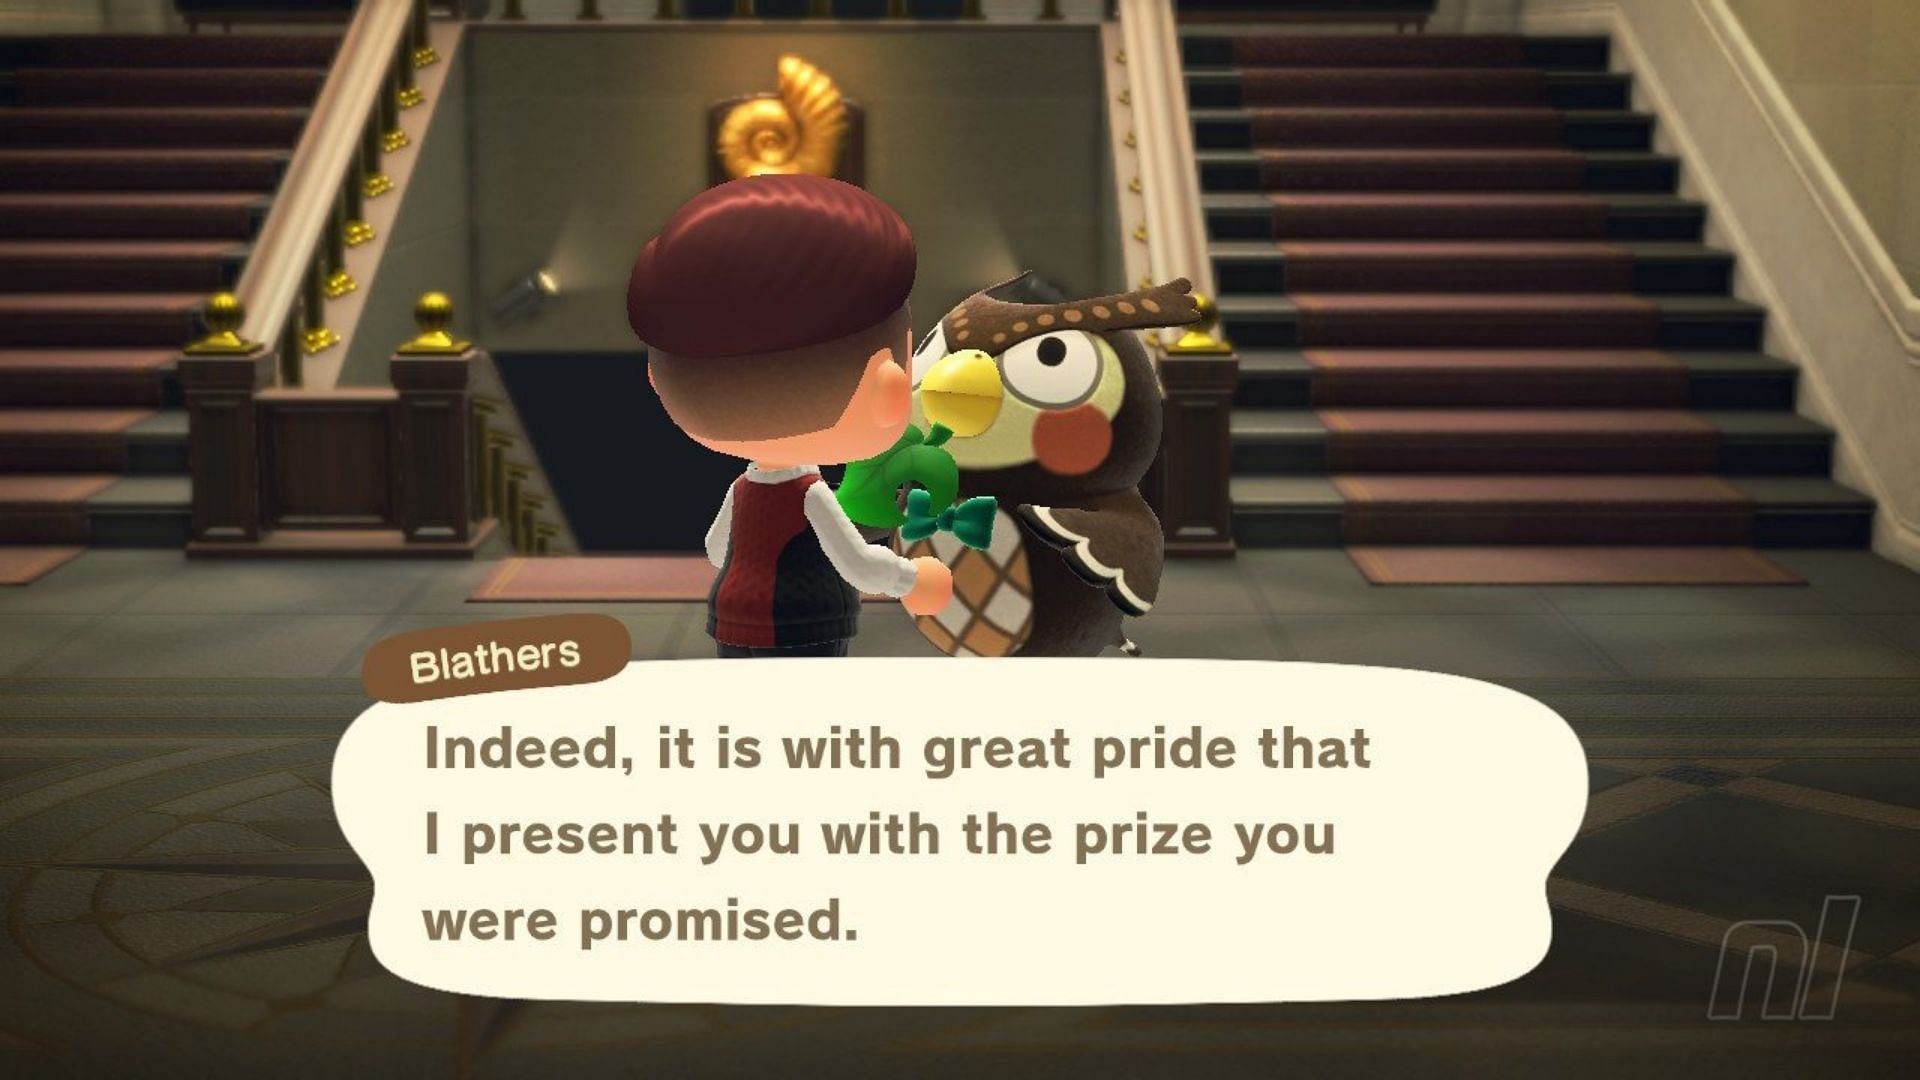 Should players donate to the museum in Animal Crossing: New Horizons? (Image via Nintendo)